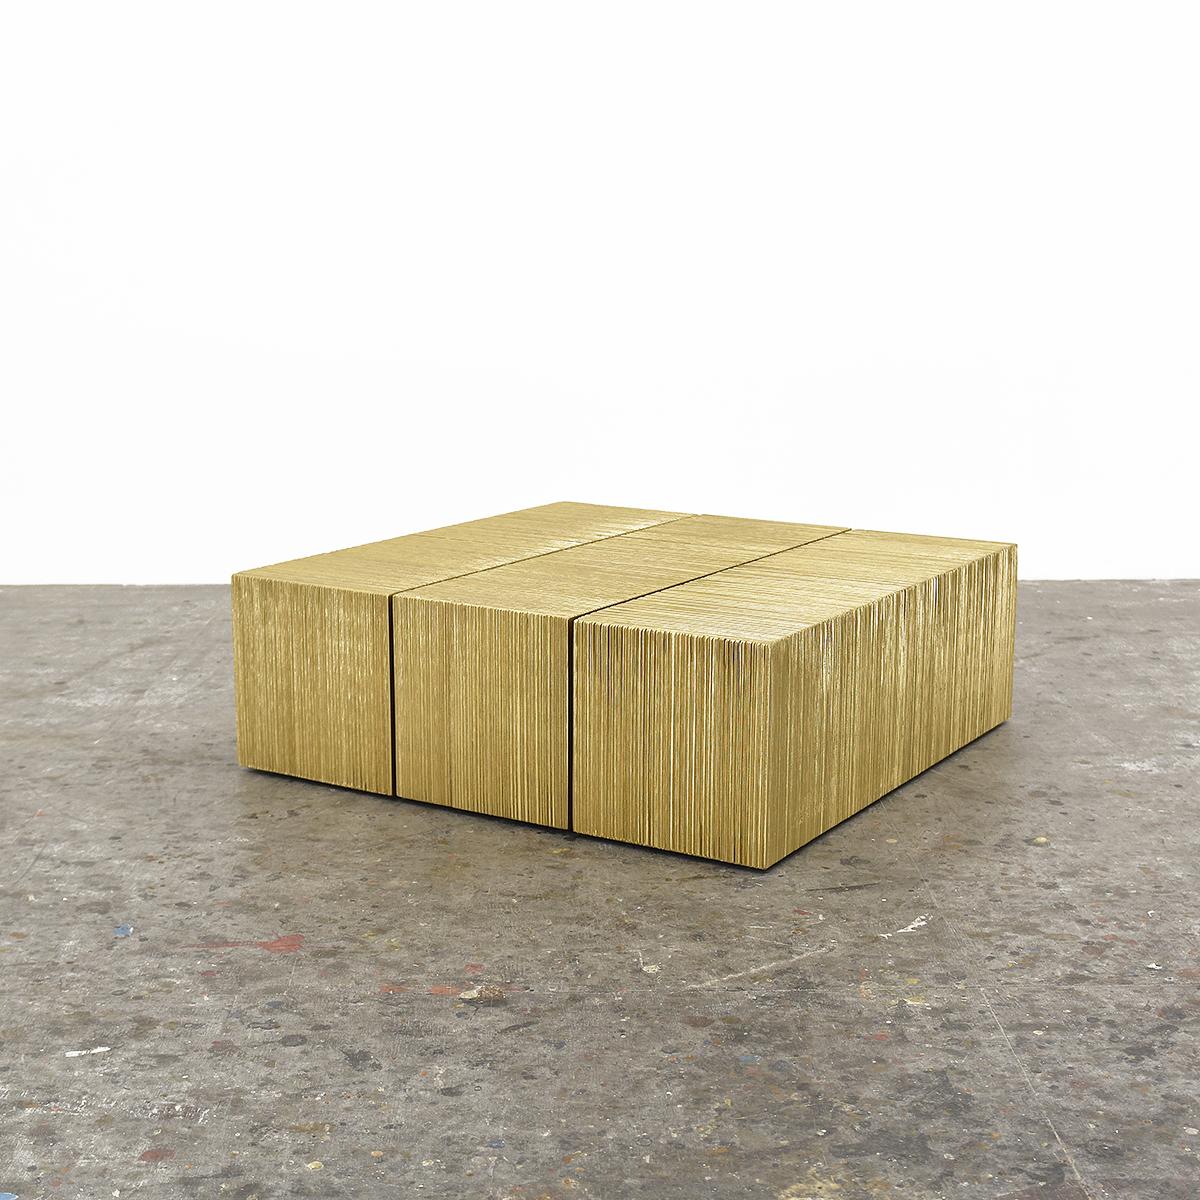 ORO - OT2 coffee table by John Eric Byers
ORO Collection
Dimensions: W91.5 x D91.5 x H30.5 cm
Materials: Maple Hardwood + Gold Metallic Lacquer 

Hand Shaped + Hand Textured + Hollow Core Stacked Lamination 

John Eric Byers creates